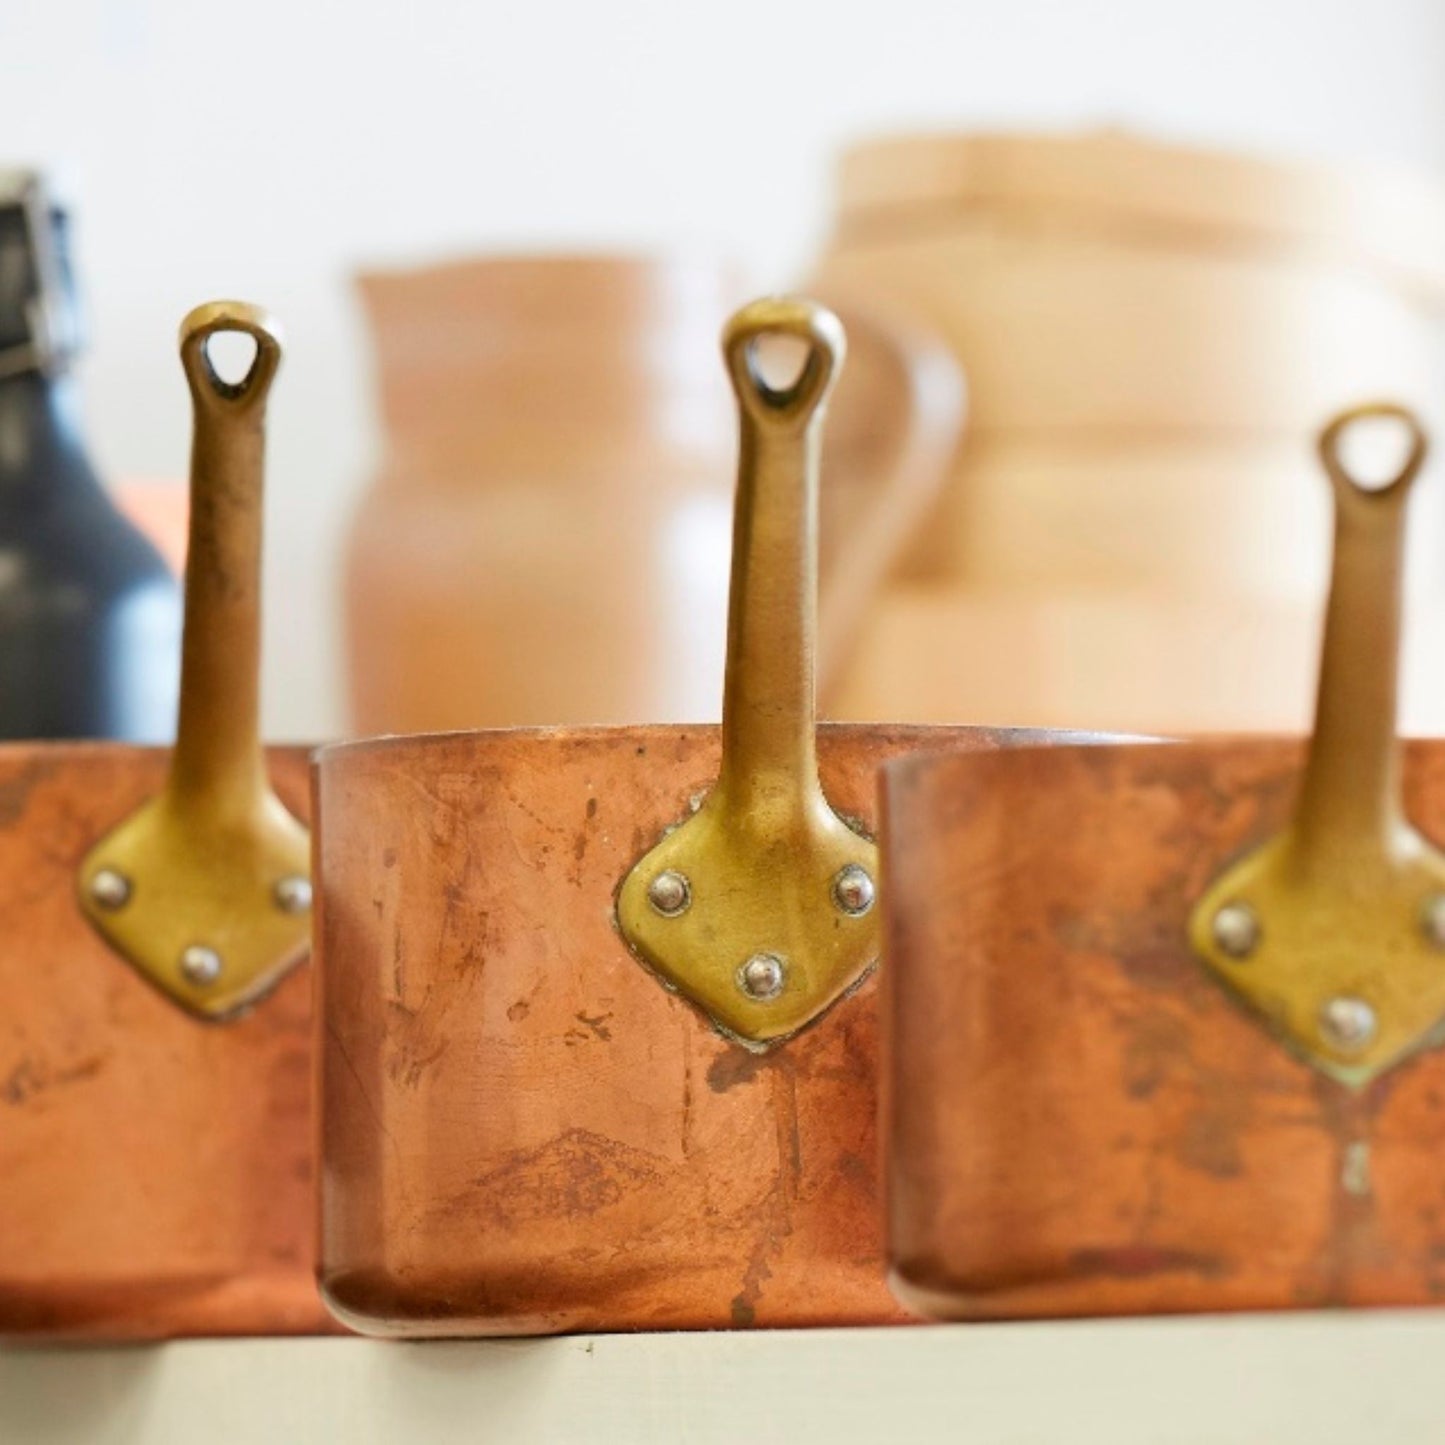 Three copper pans lined up on a shelf